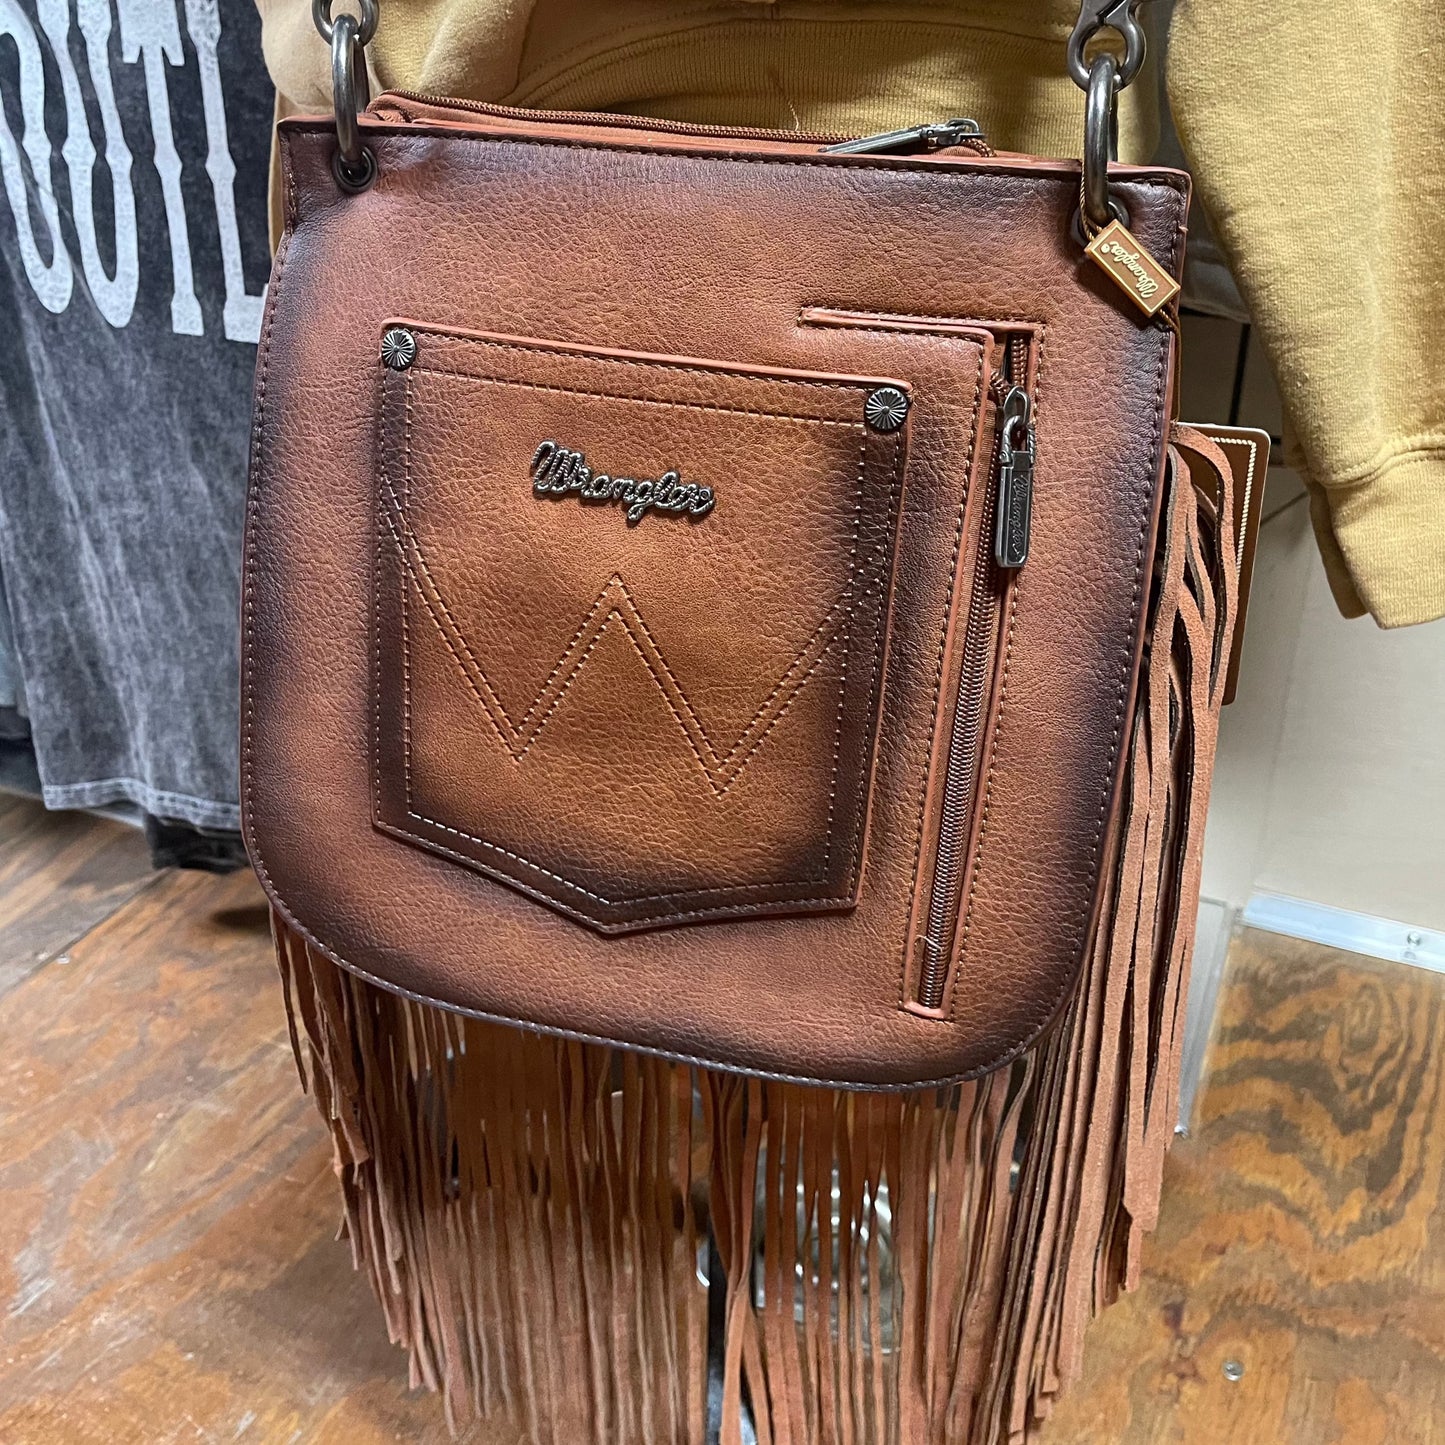 Back view of the brown rivet detailed crossbody bag showcasing the wrangler pocket and the zipper closure concealed carry compartment